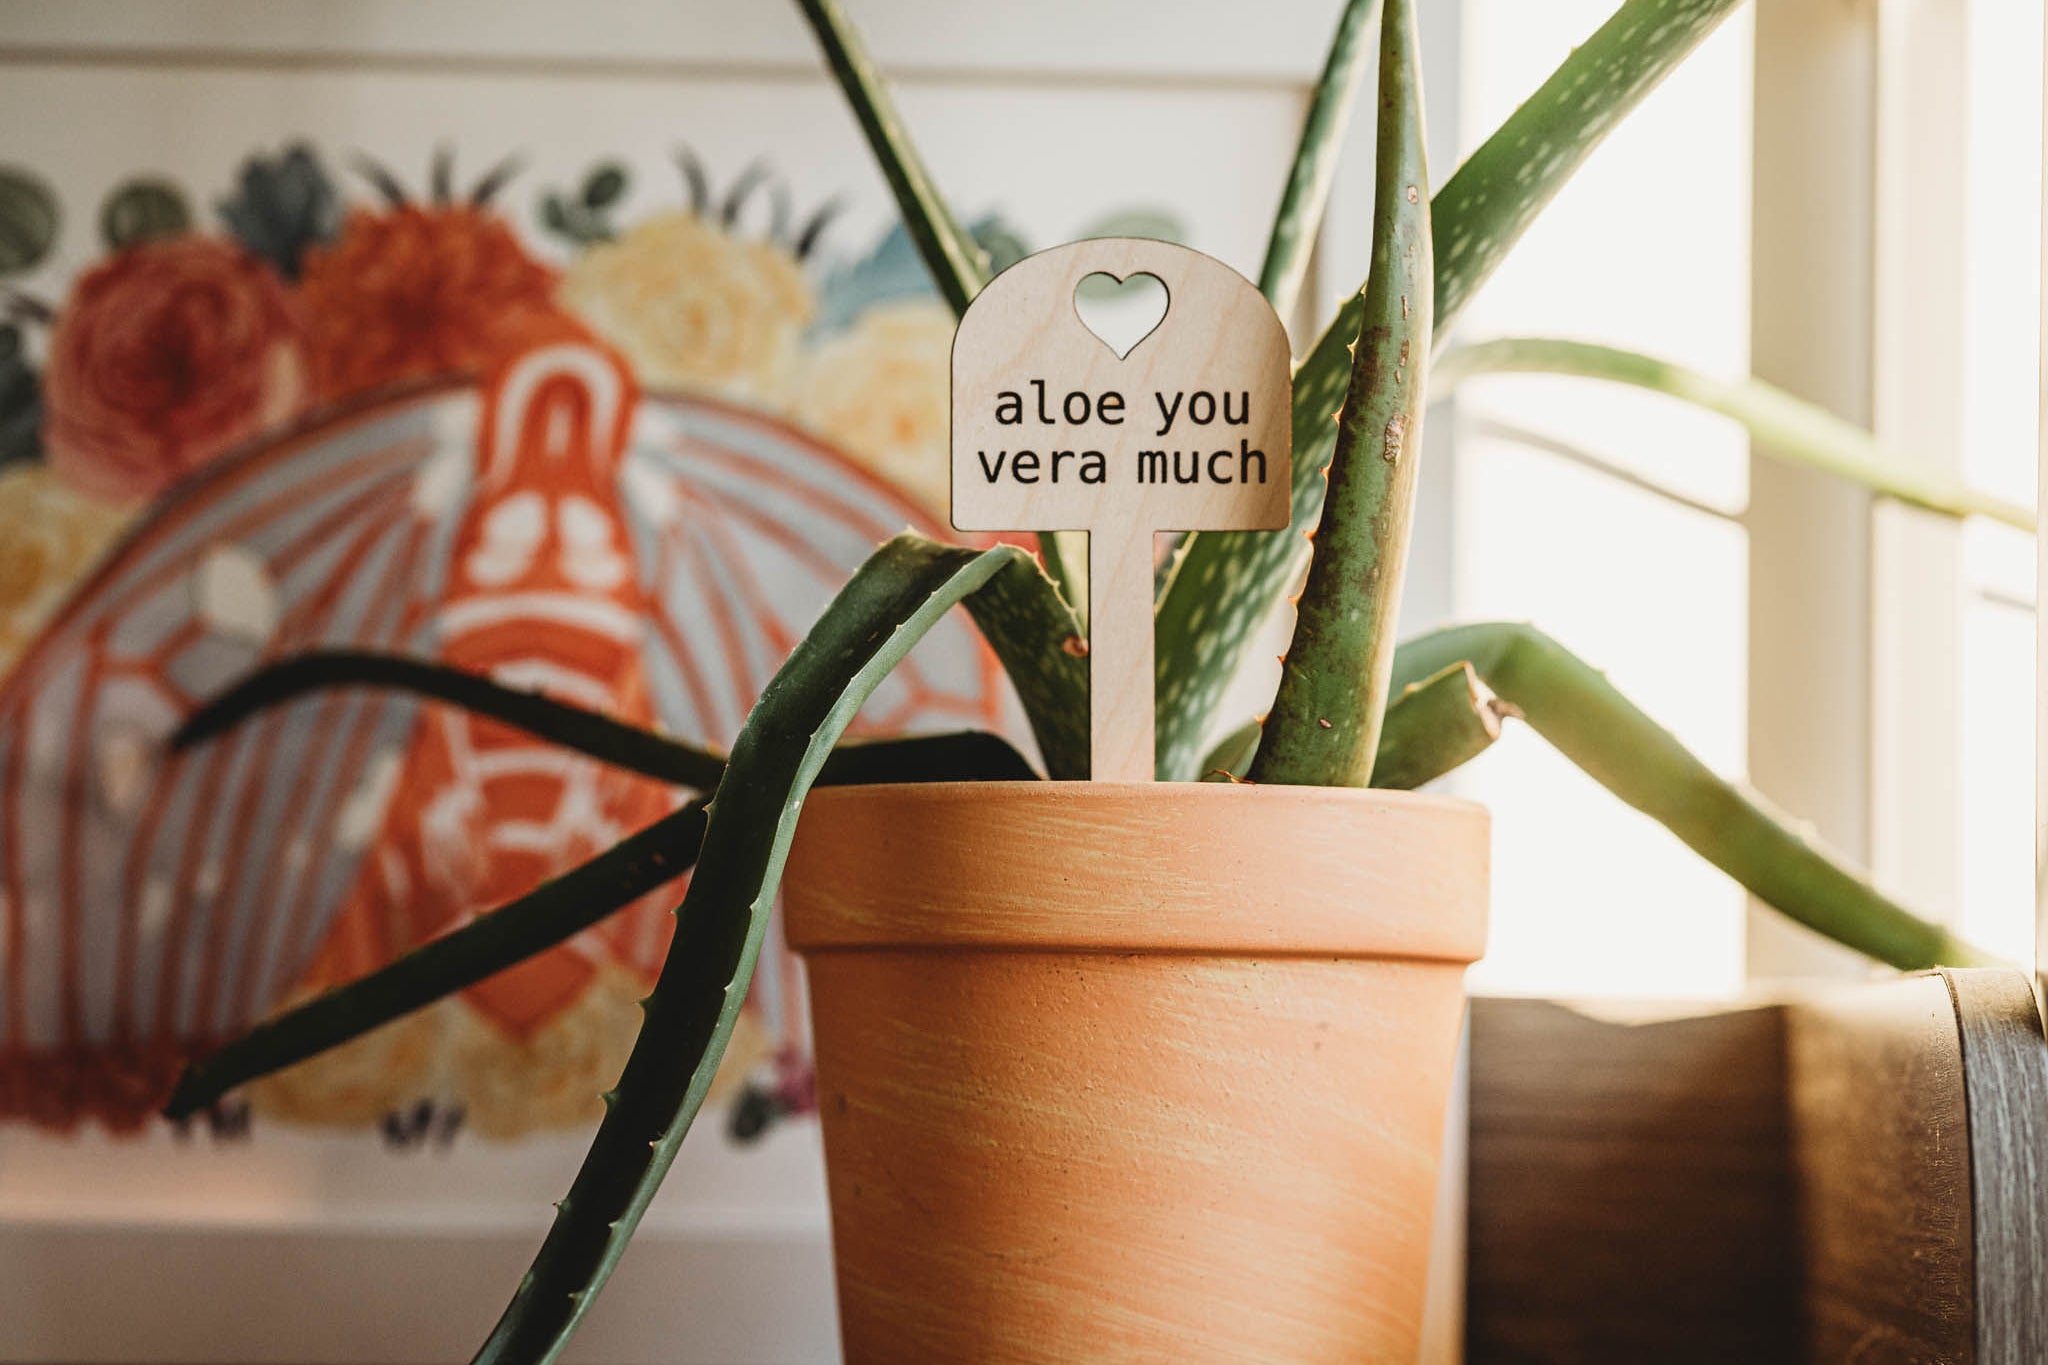 An aloe plant in a terracotta pot with a wooden marker reading 'aloe you vera much', placed on a windowsill. Behind it is a decorated framed artwork with a red and orange pattern